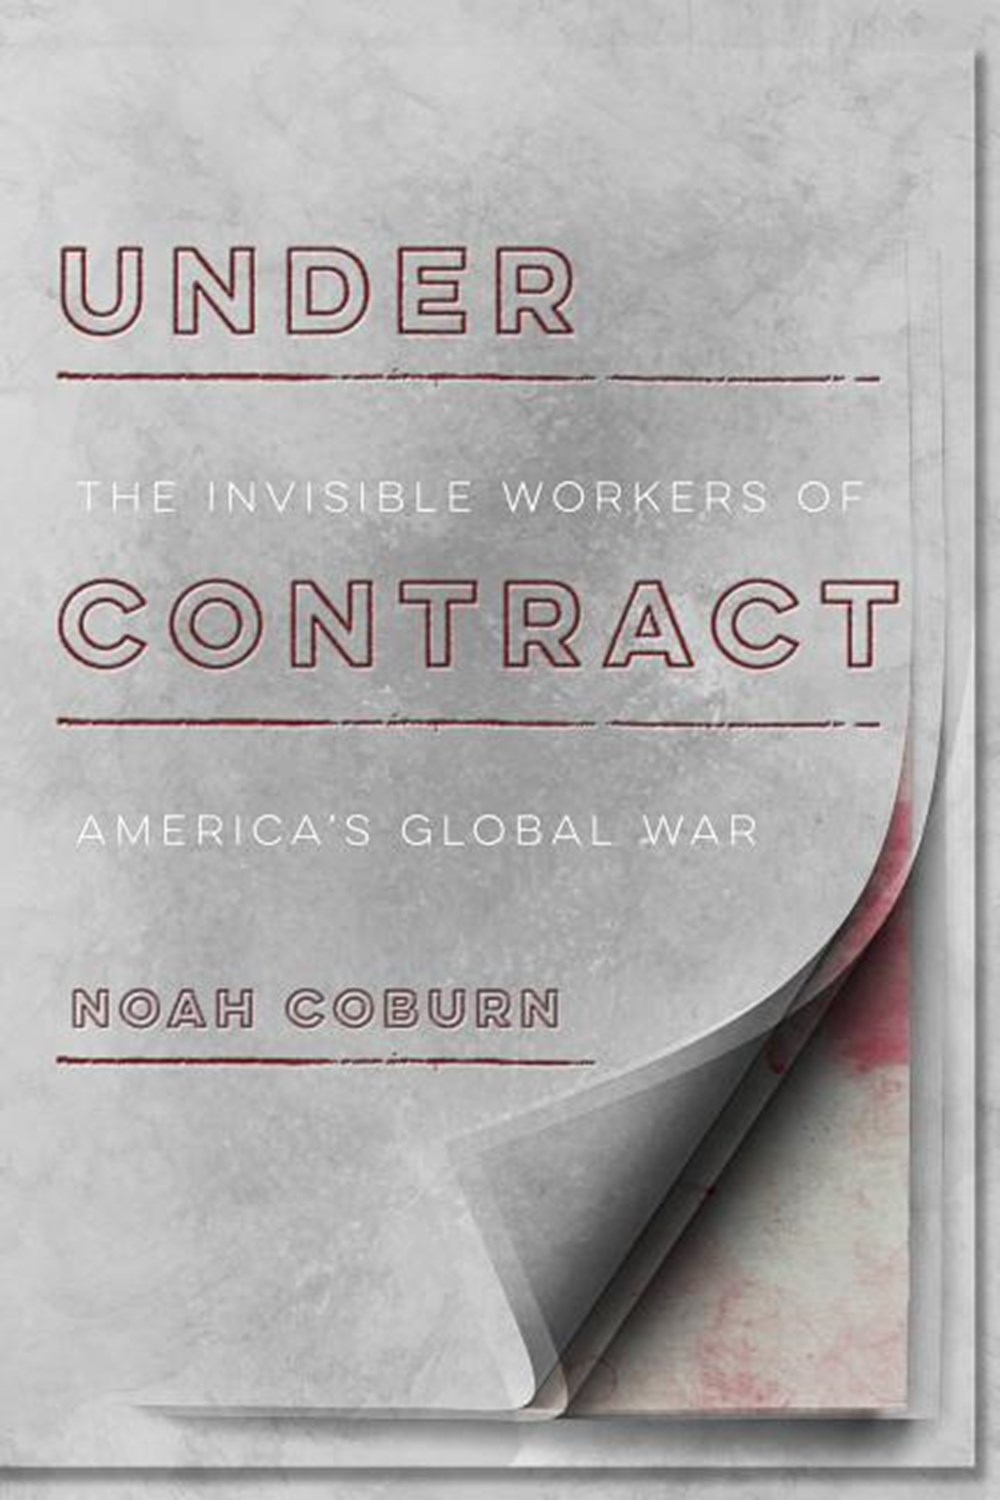 Under Contract: The Invisible Workers of America's Global War